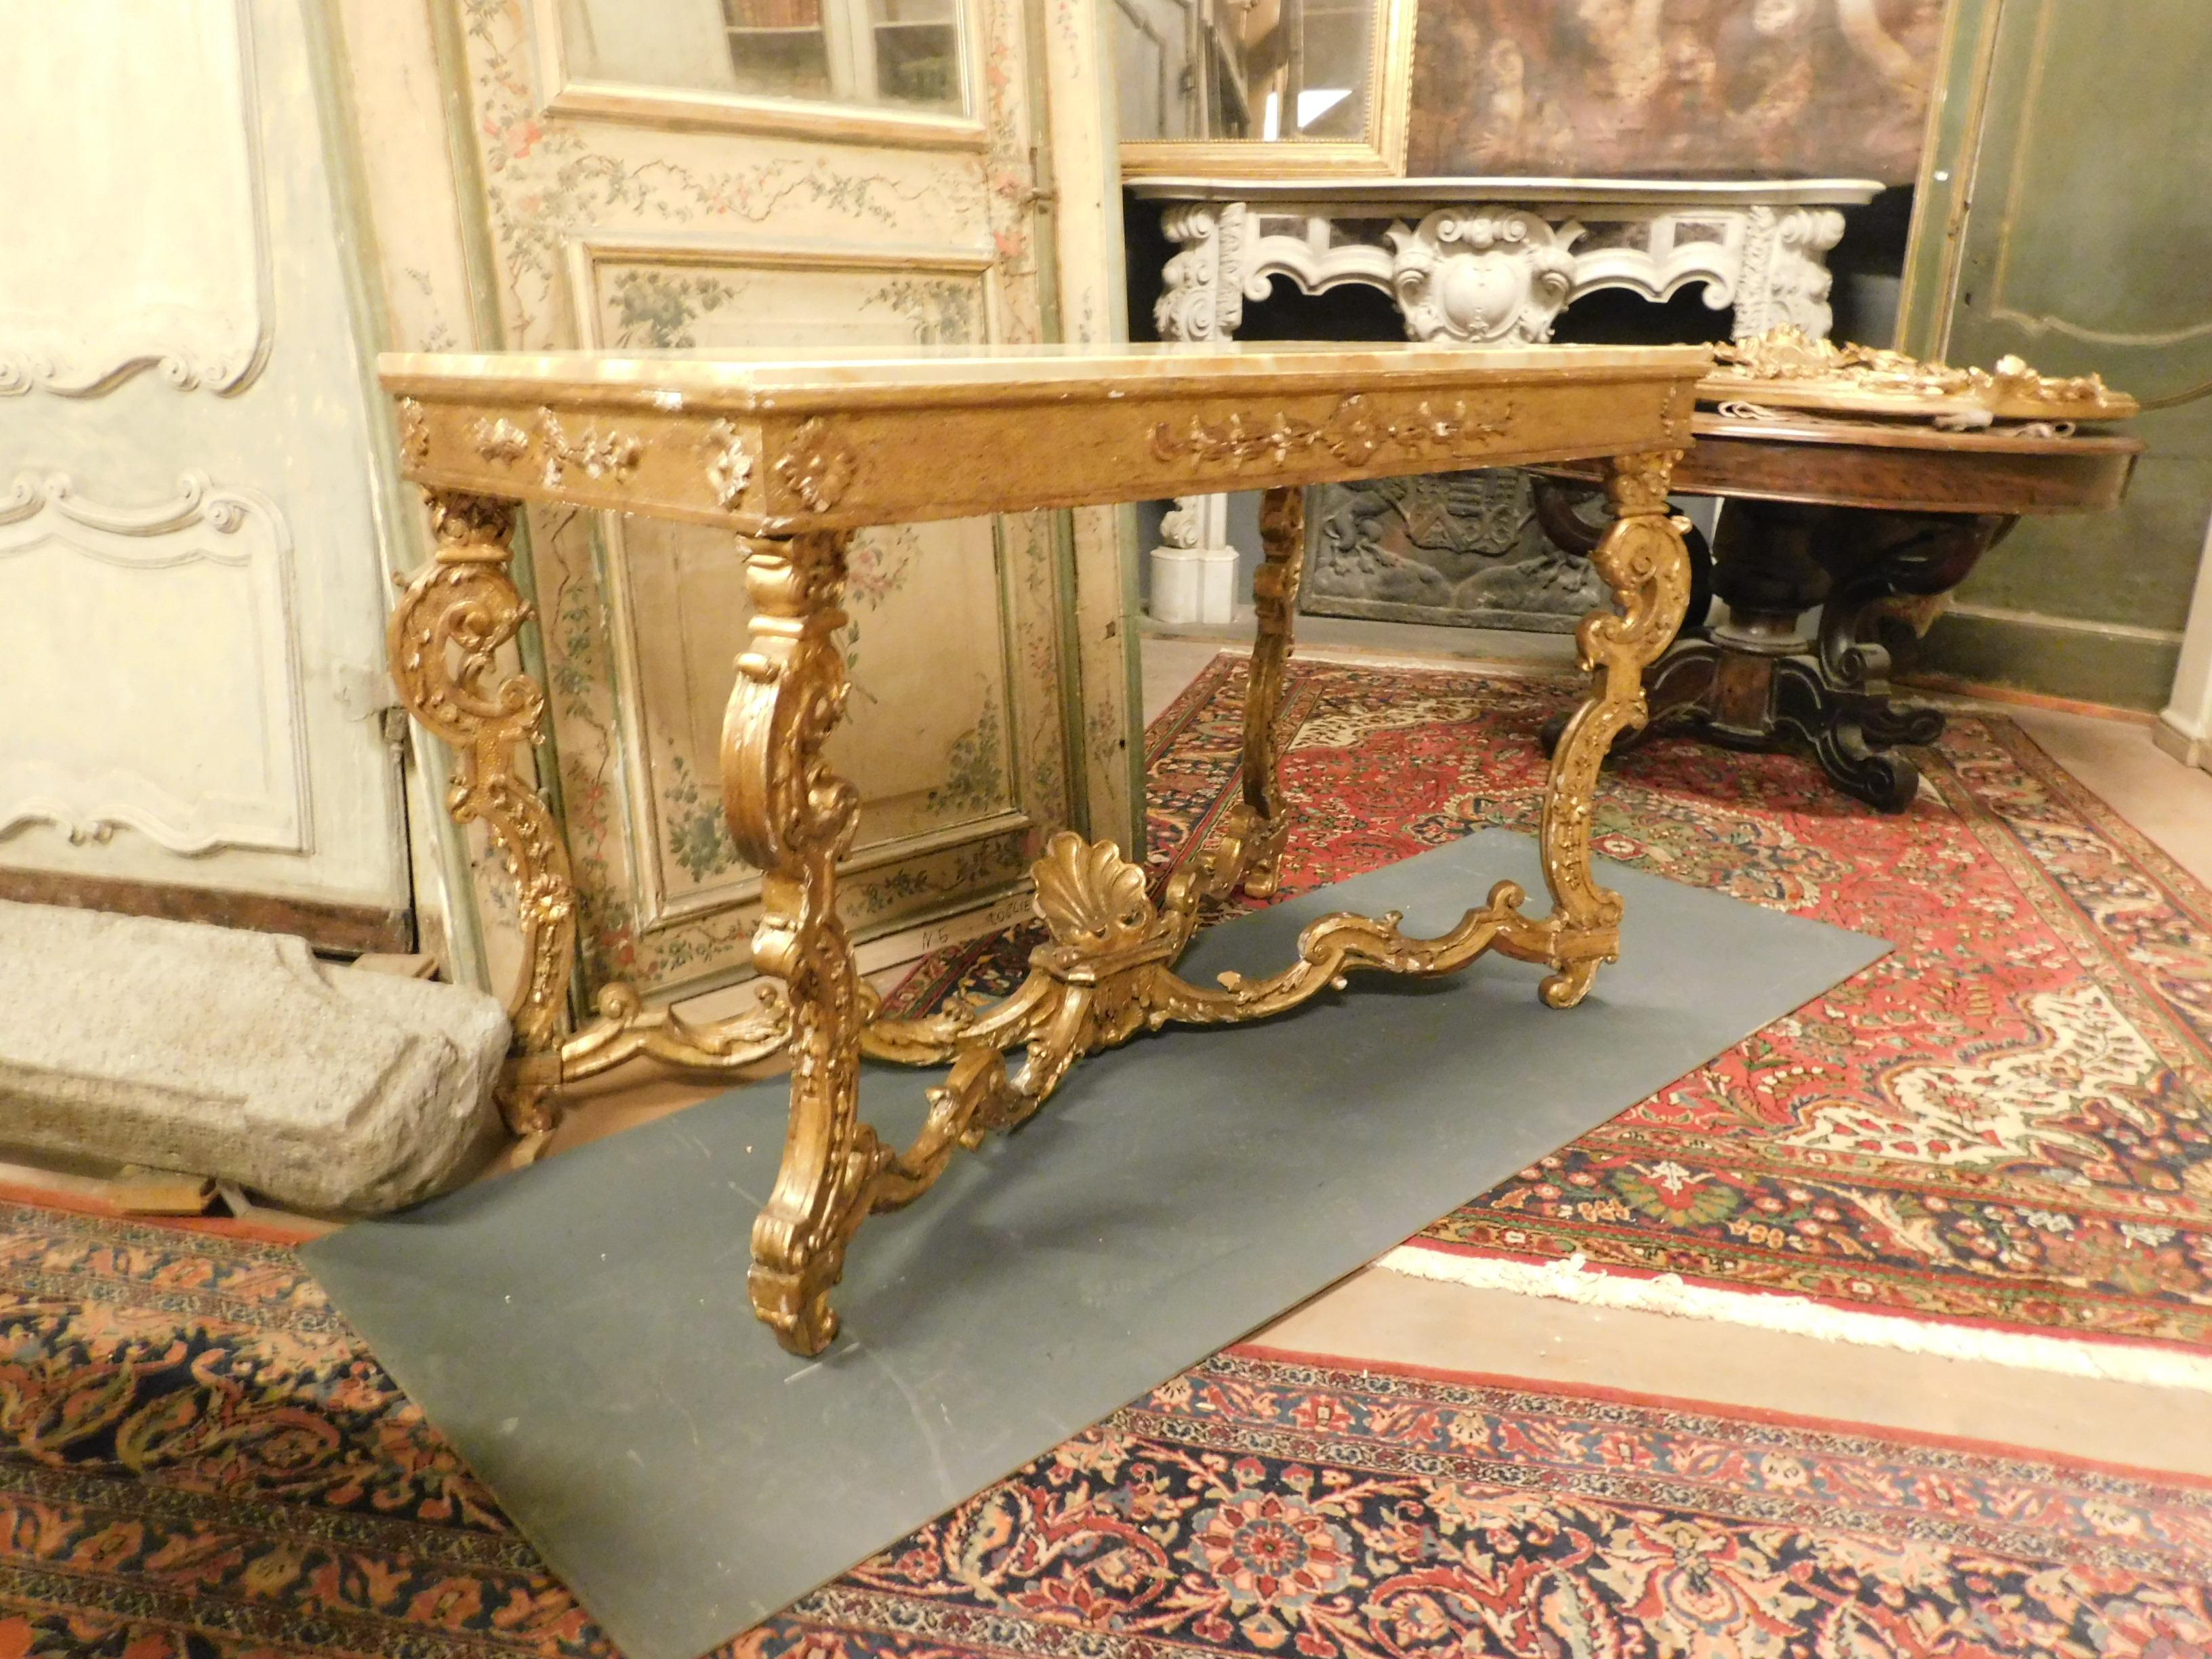 Italian Antique Wood Golden Console Table with Marble Top, 18th Century Naples, Italy